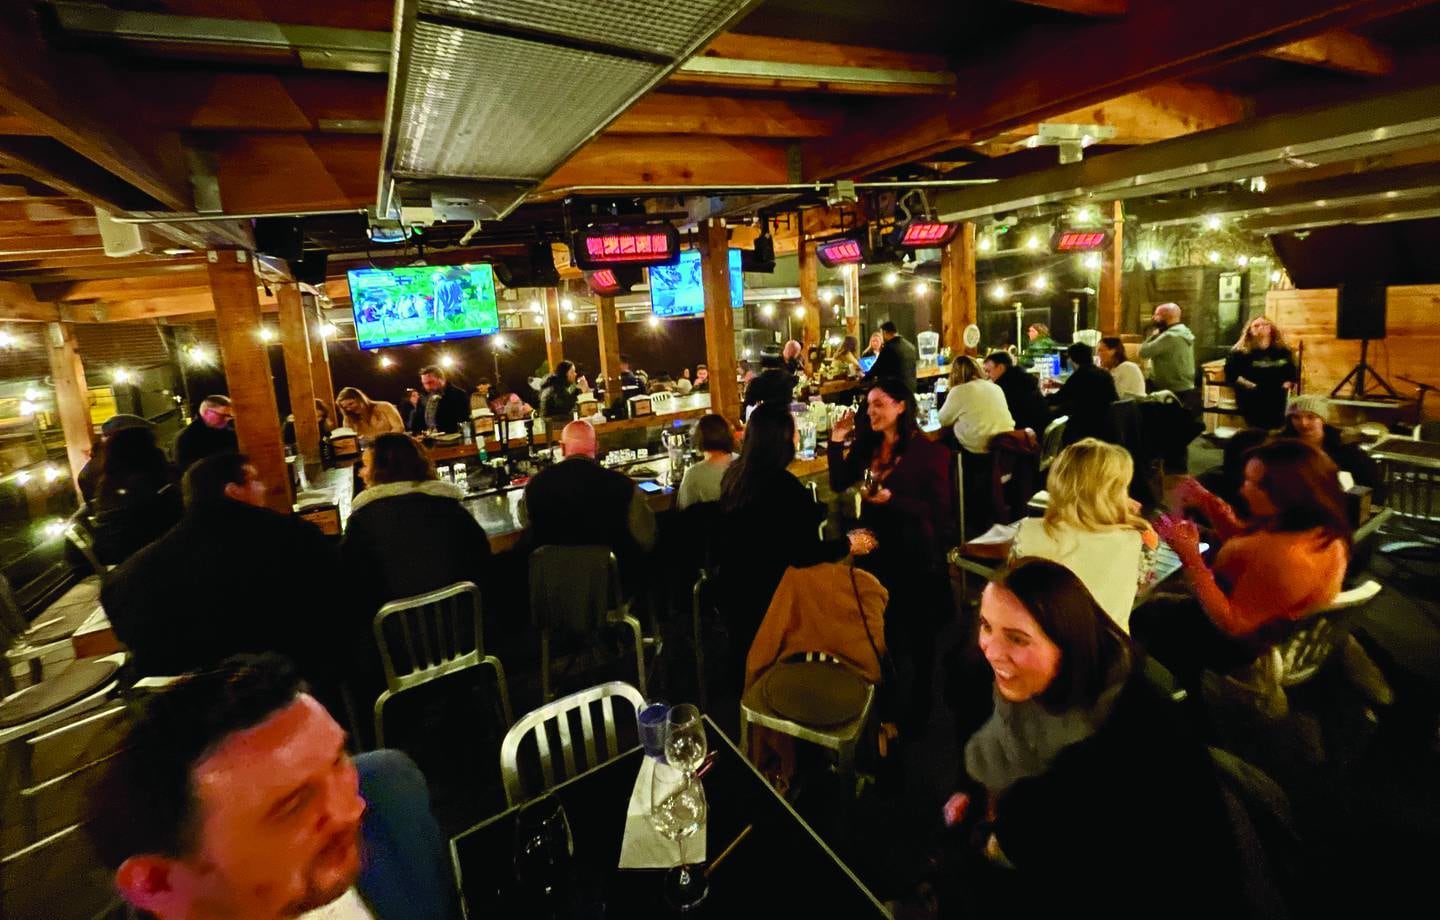 Preservation in Geneva offers outdoor dining throughout the season on its winter patio.